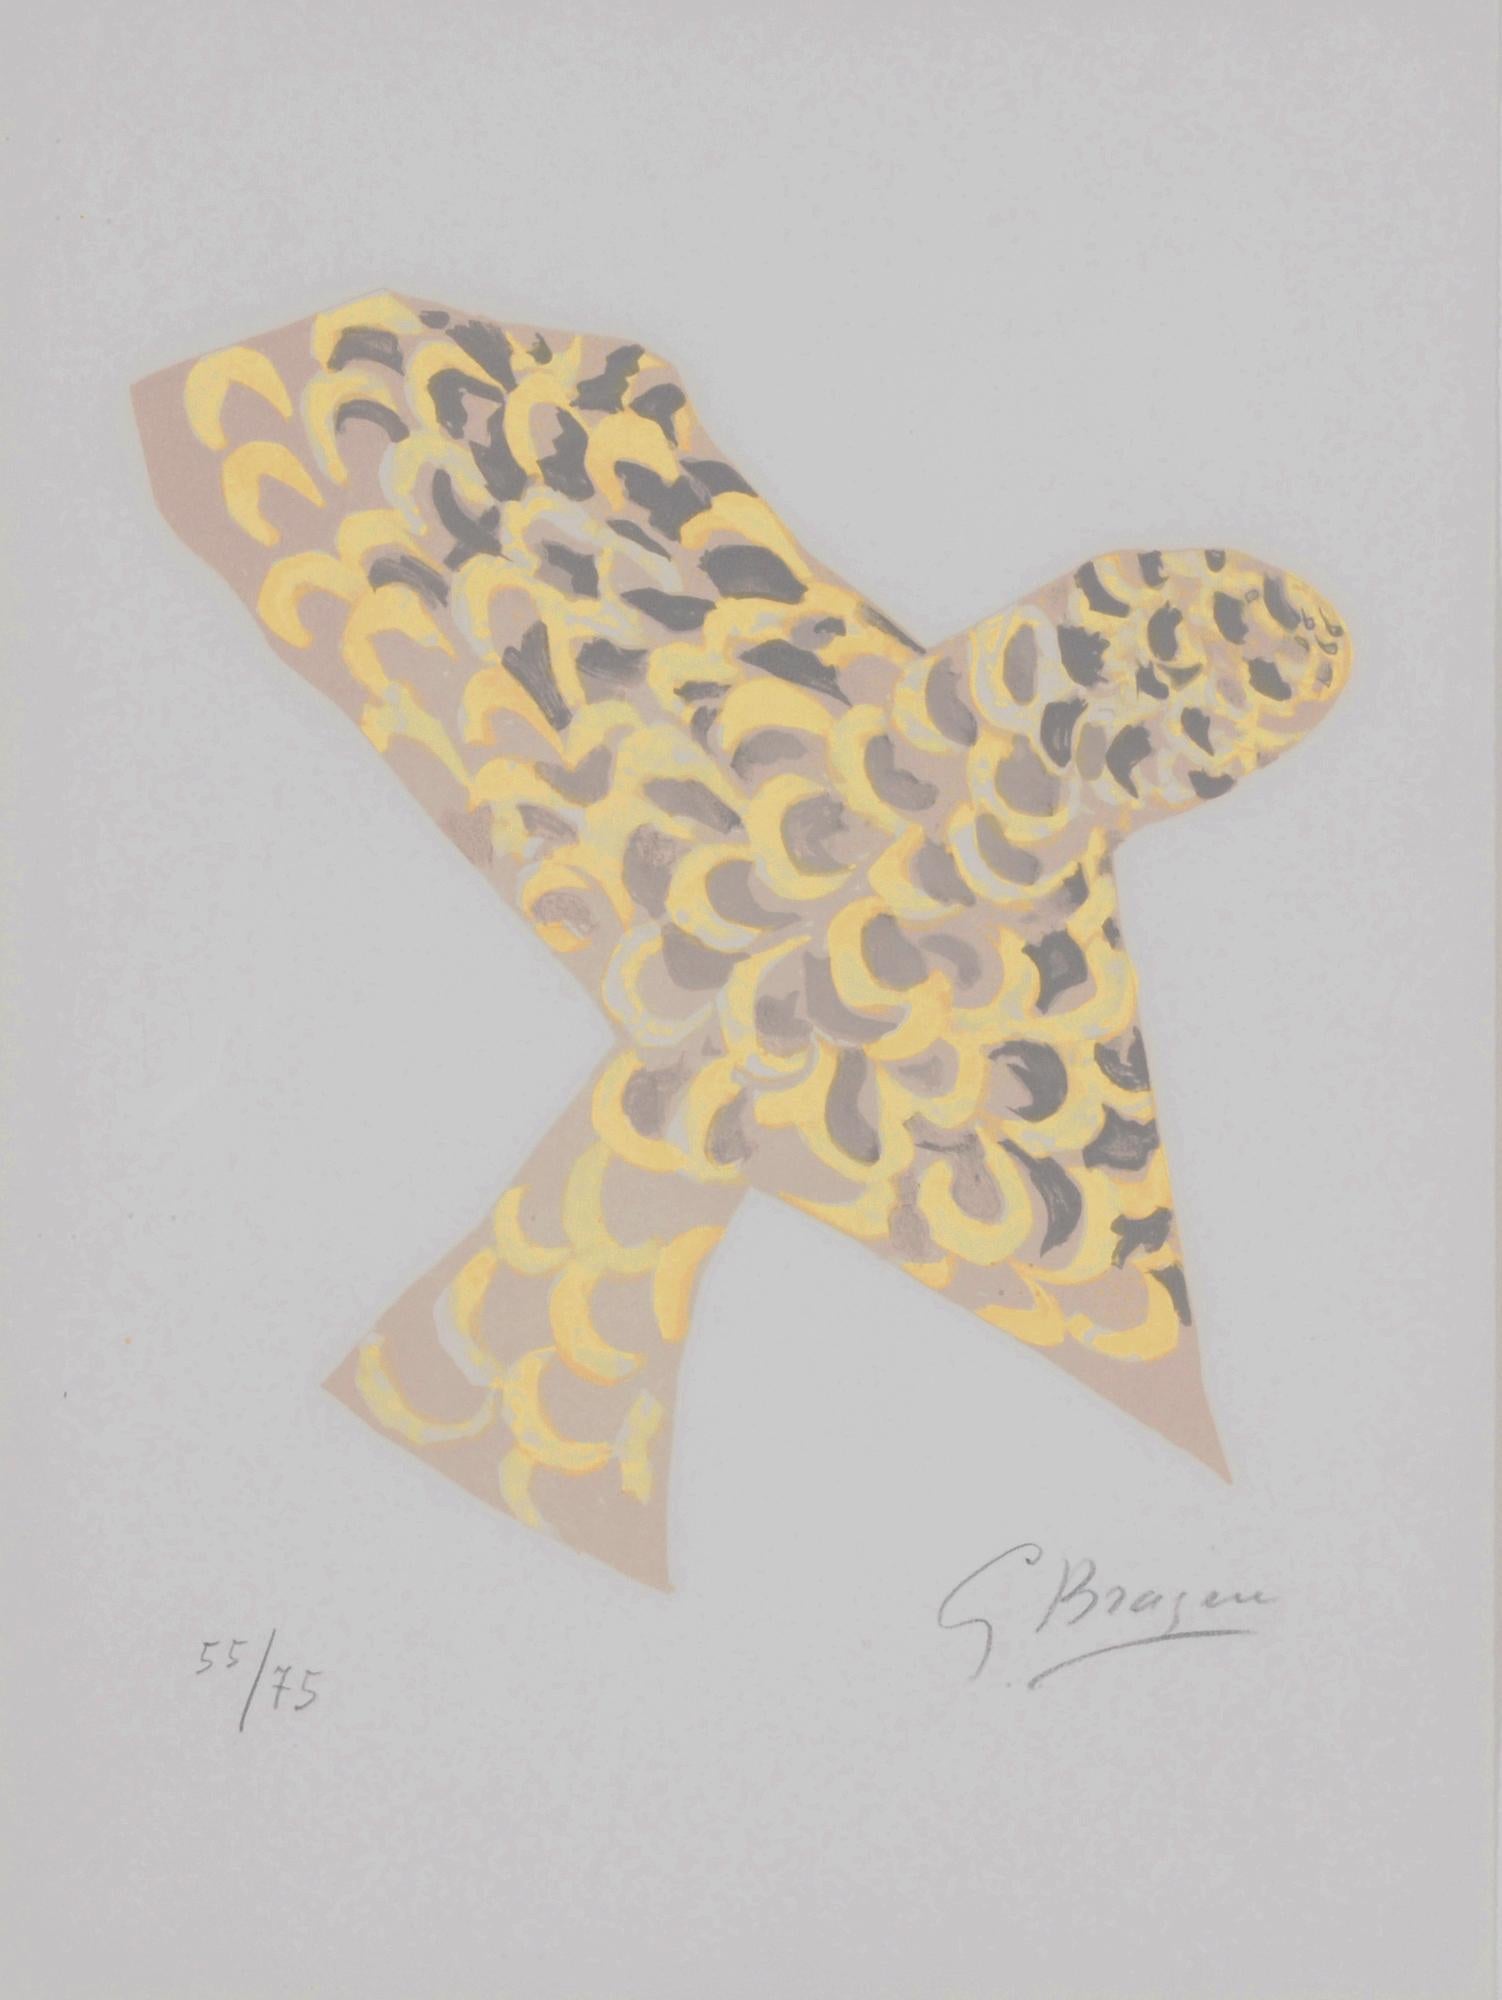 George Braque Abstract Print - The bird of prey "Lettera Amorosa" 